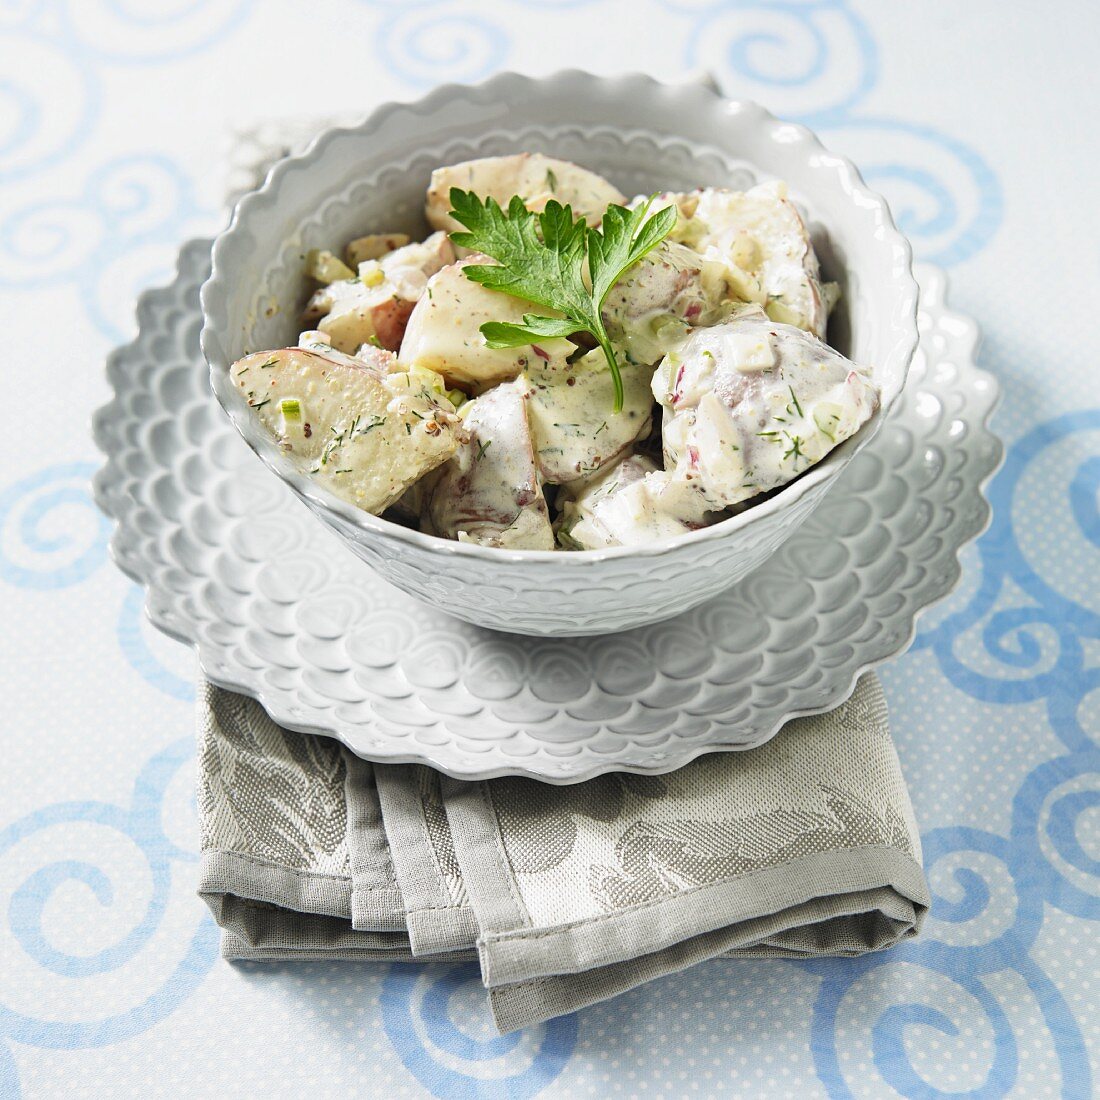 A Bowl of Cape Cod Potato Salad with Red Potatoes, Dill, Onion and Celery